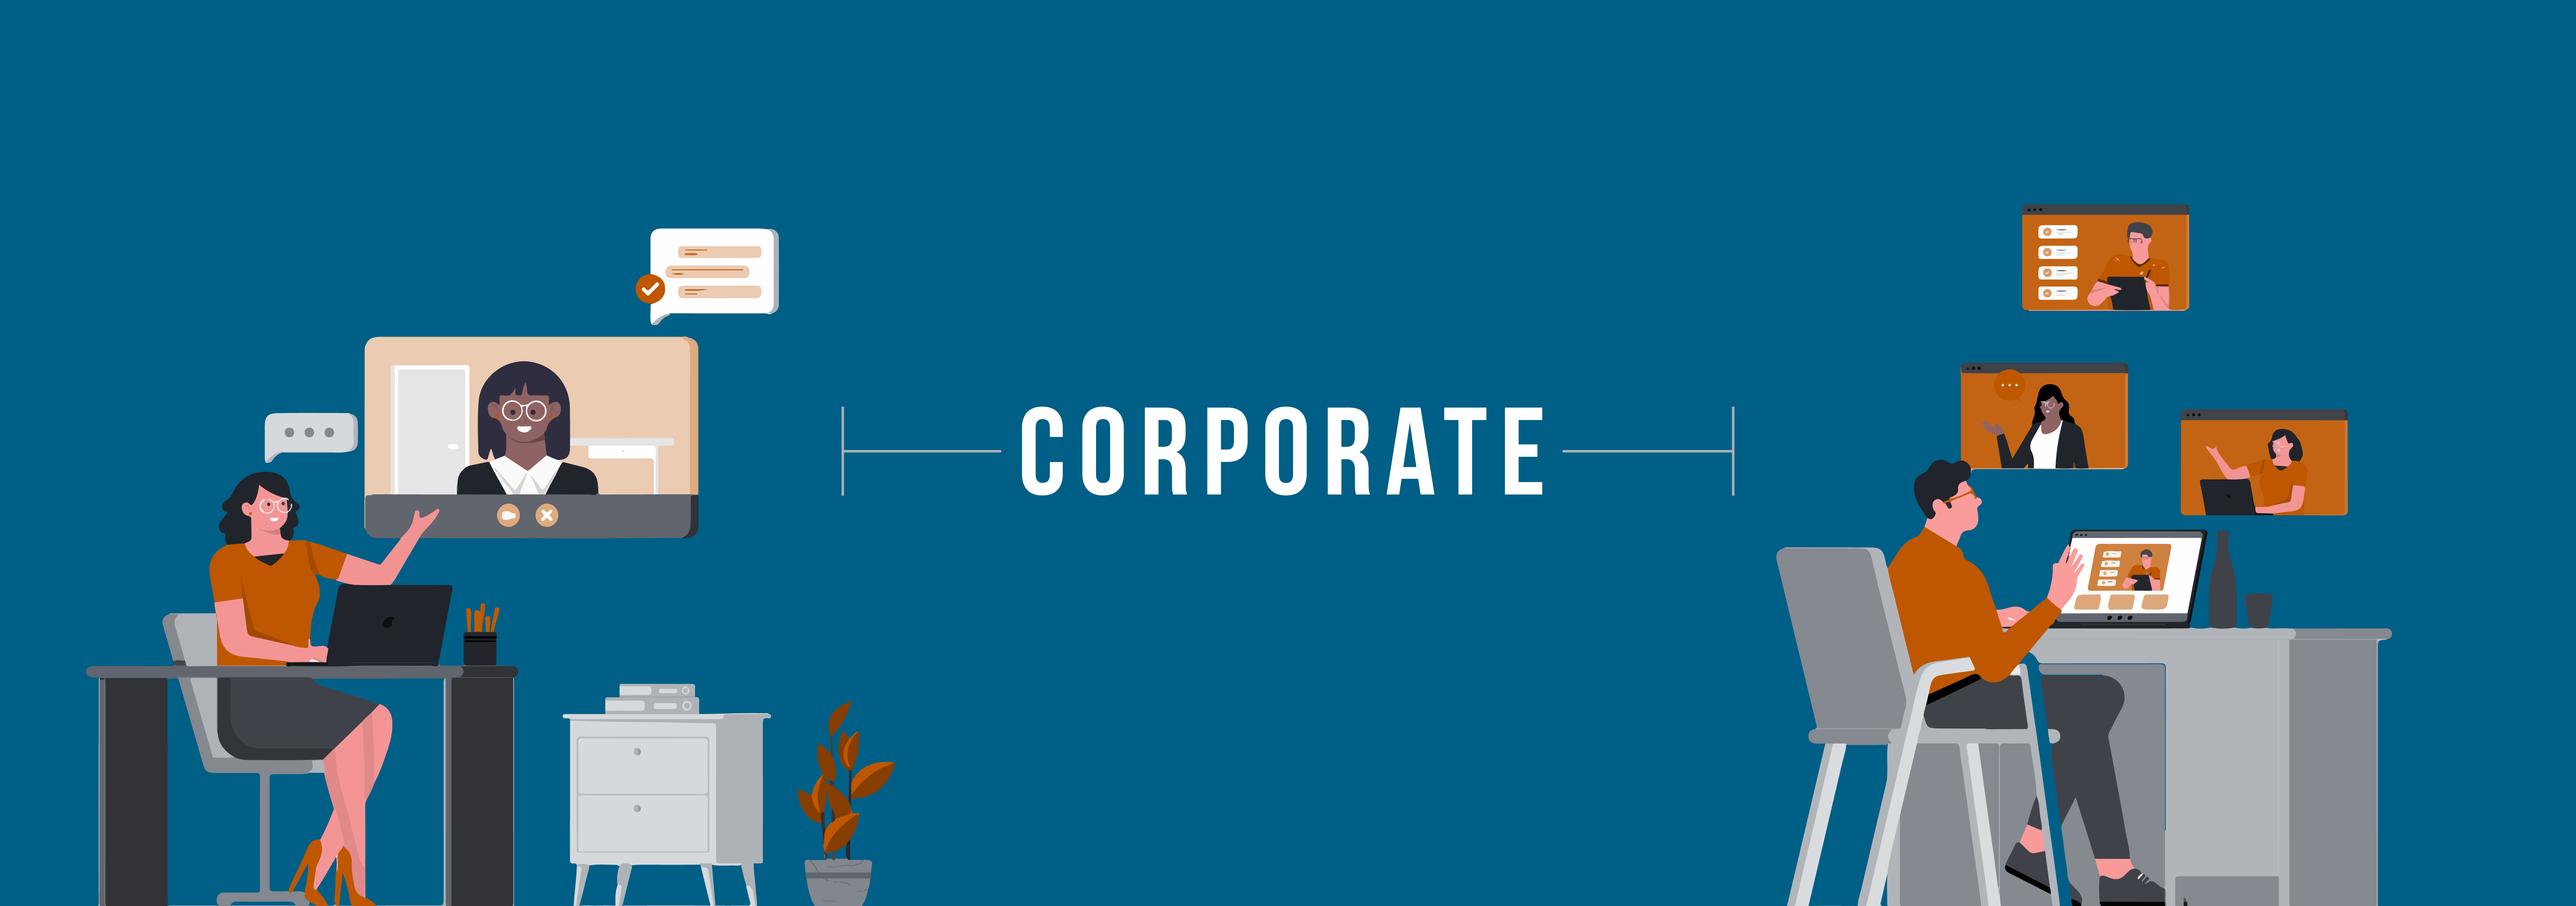 Corporate Banner